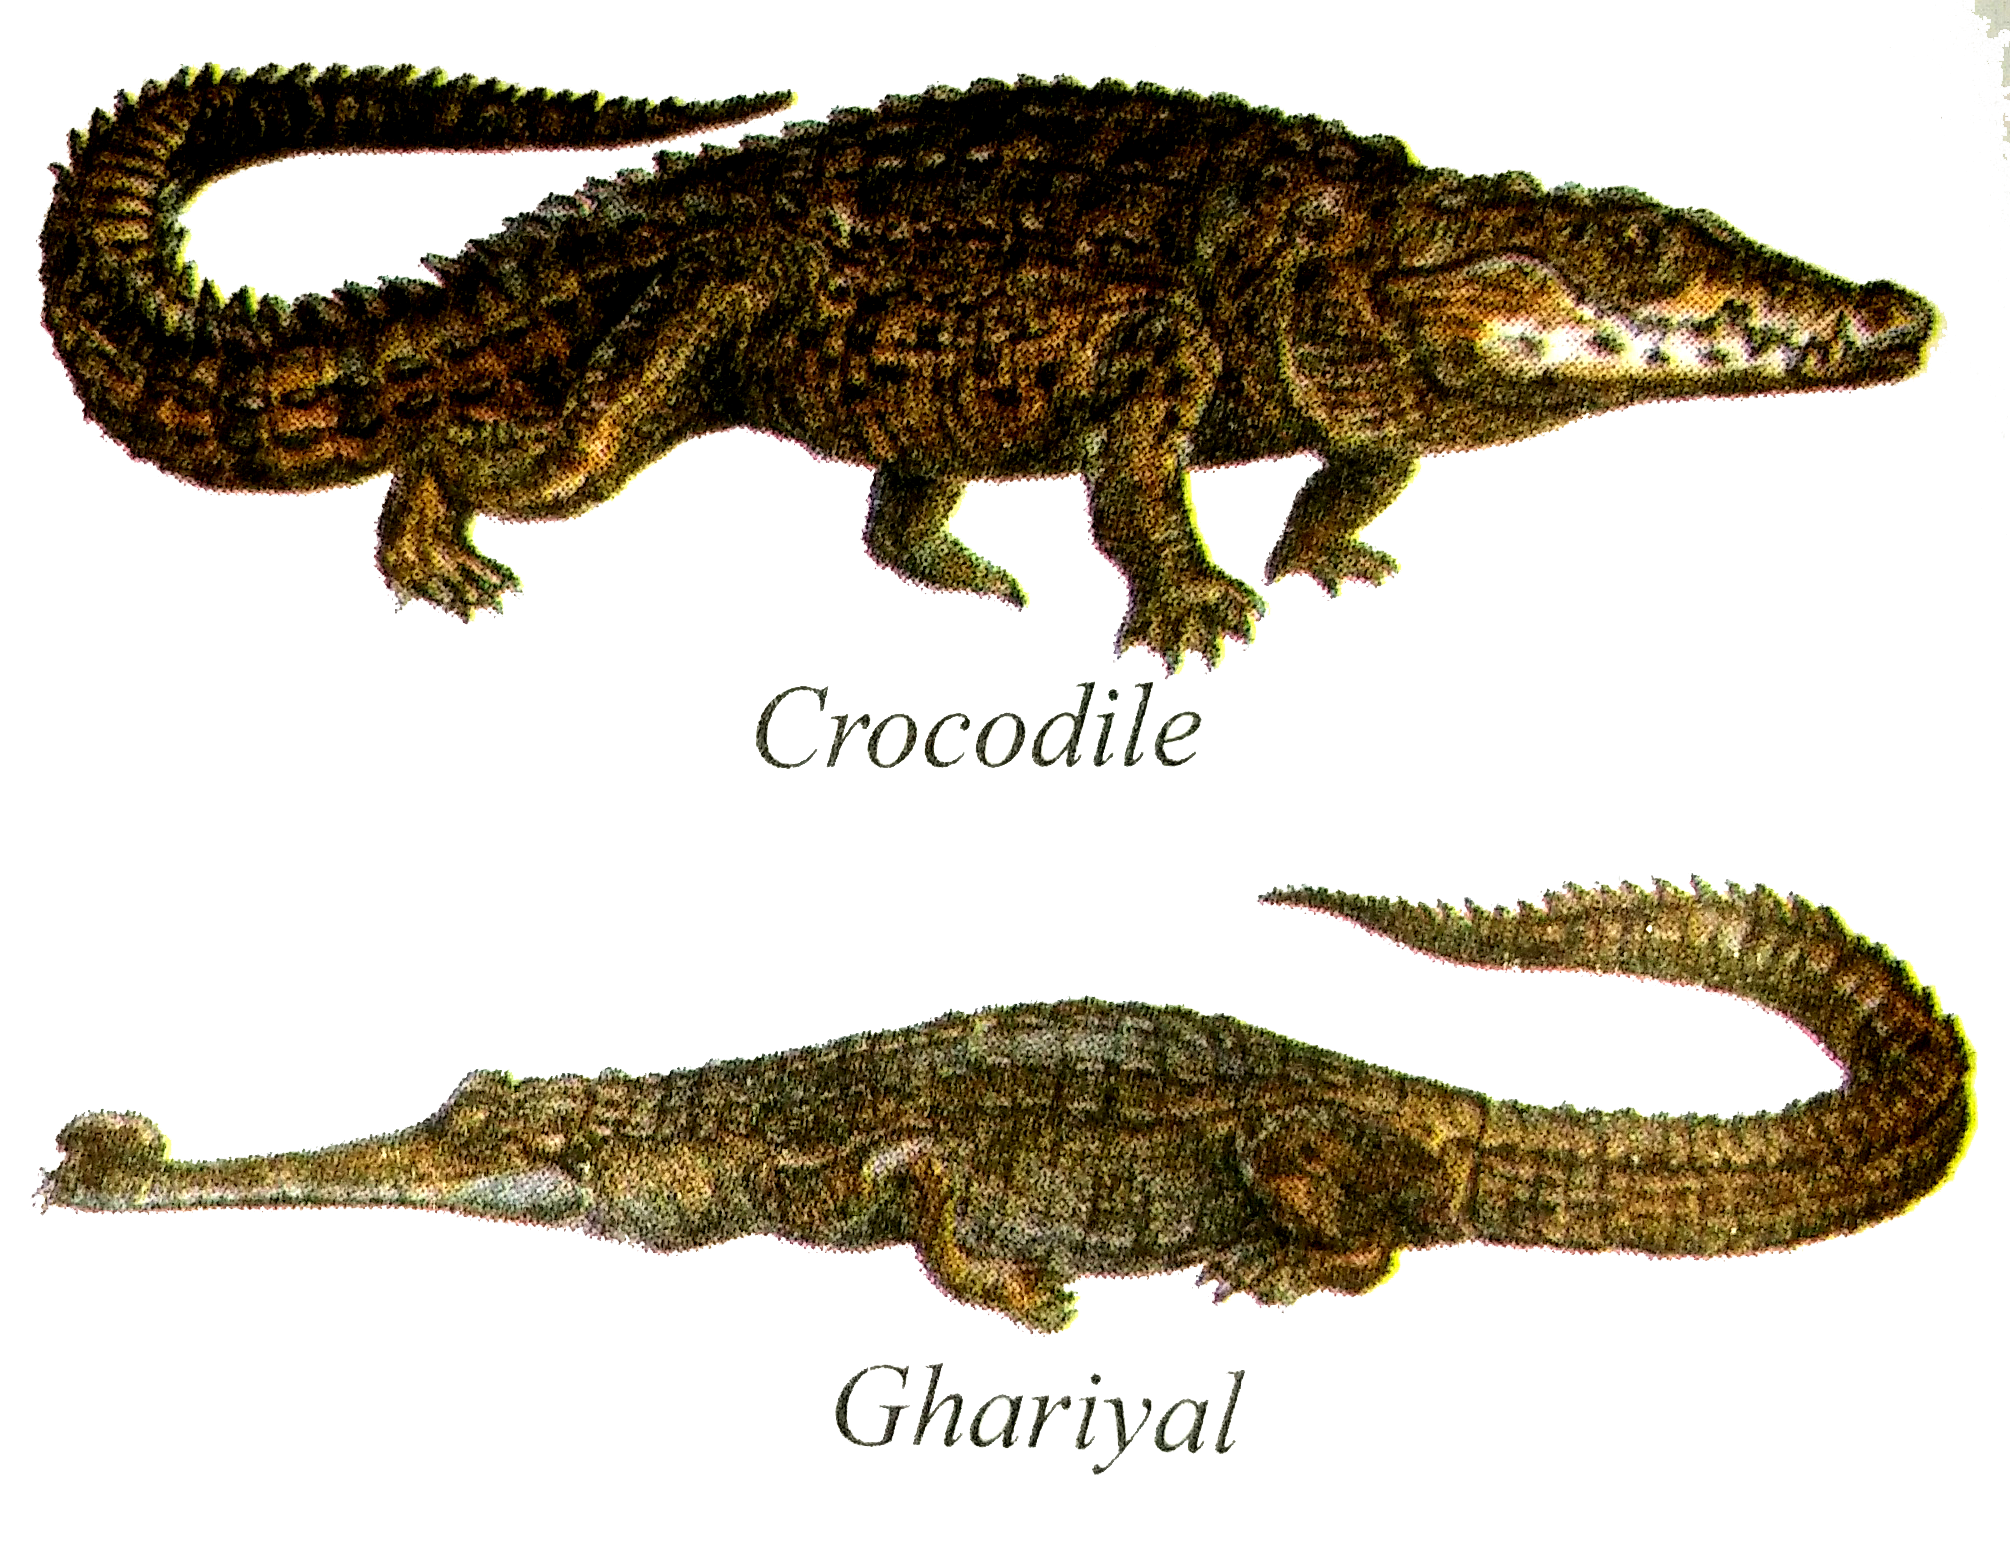 Animals like ghariyal & crocodile live in water as well as on land. Are  they amphibians or reptiles?